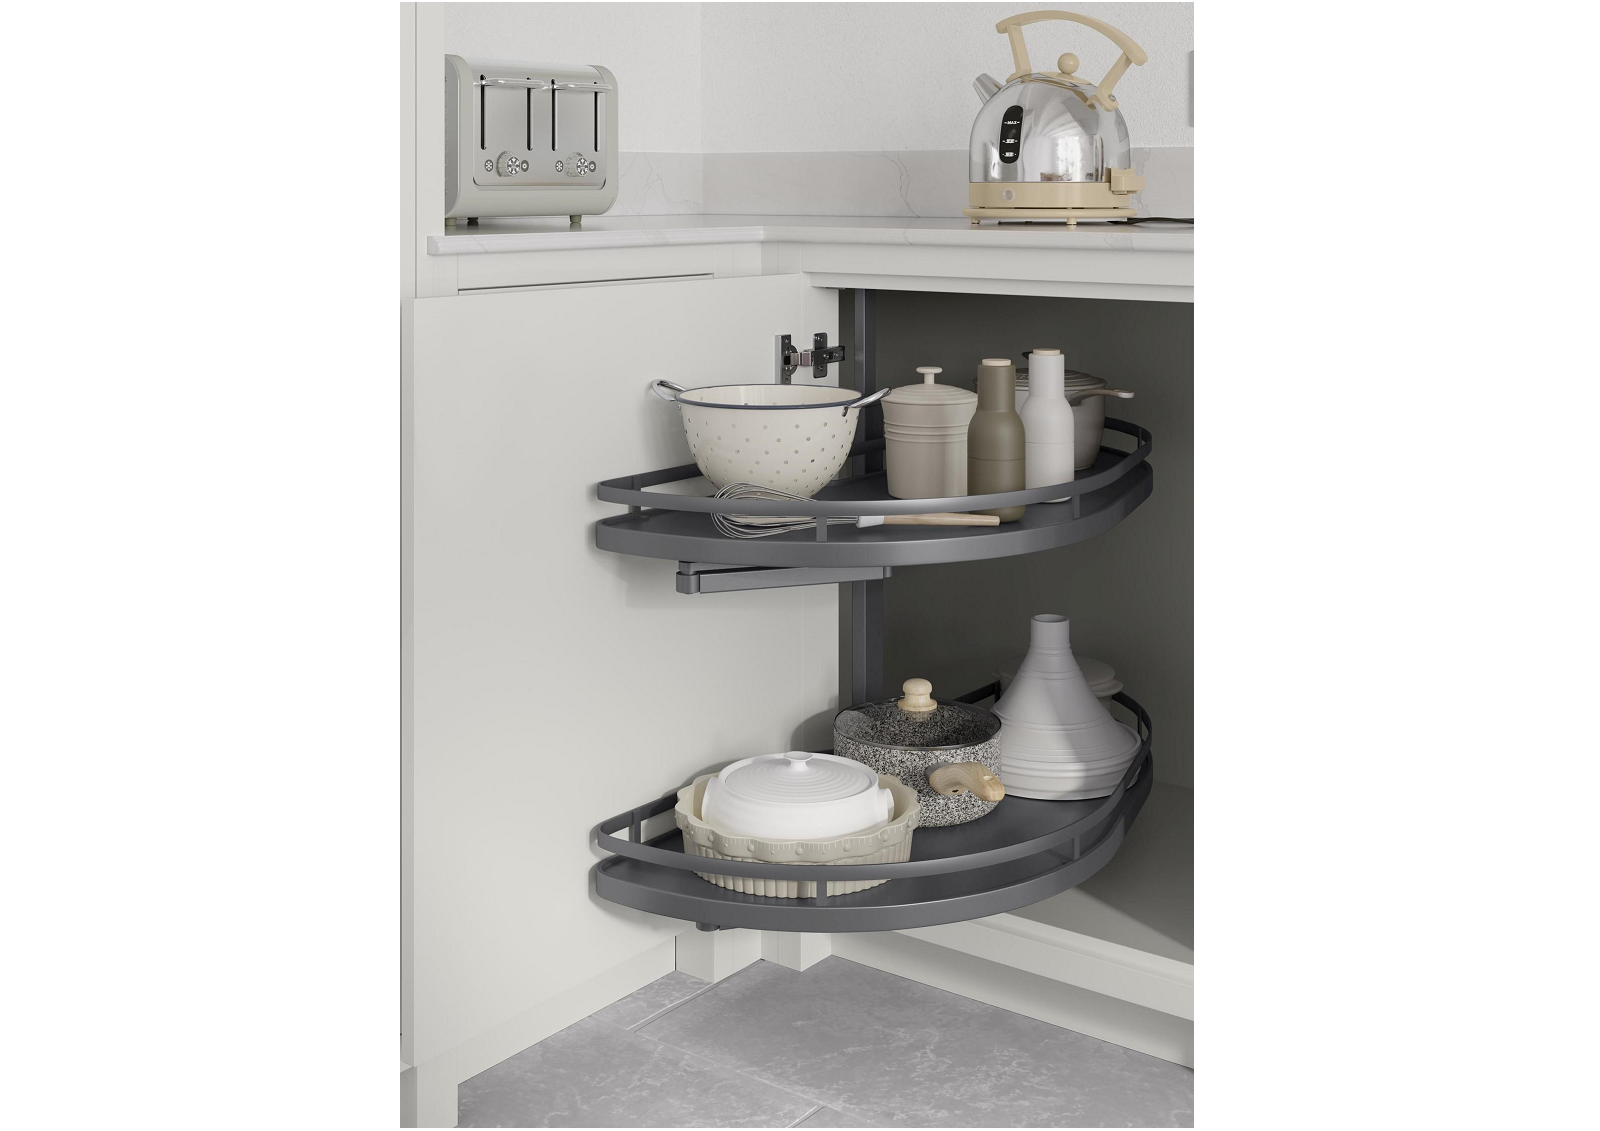 Smooth-finish, slim-frame, shaker-style kitchen painted vintage pink and light grey featuring Arco Linea pull-out shelving in Anthracite